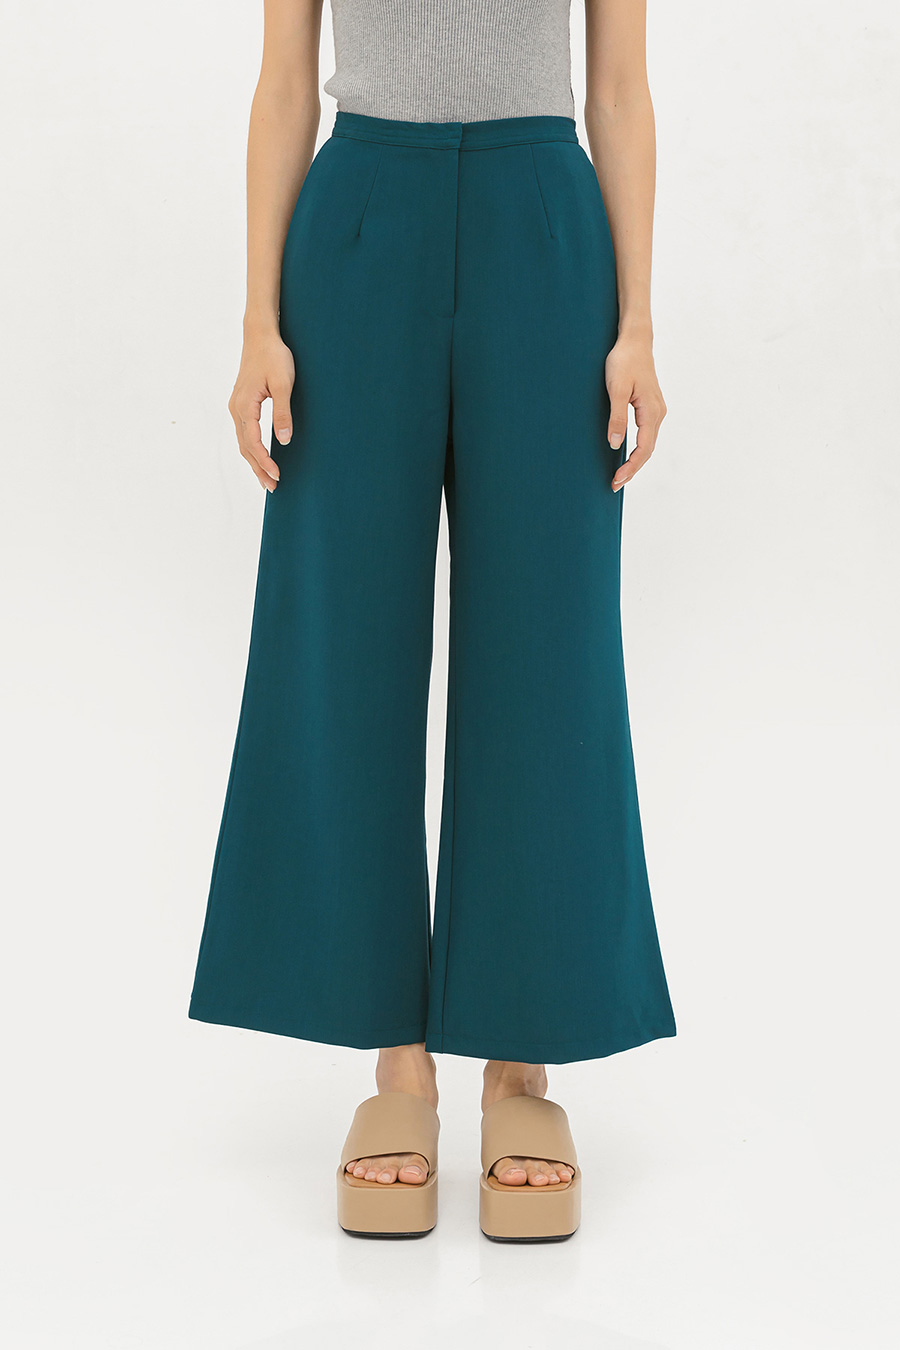 *SALE* BAYLEIGH PANTS - AEGAN [BY MODPARADE]